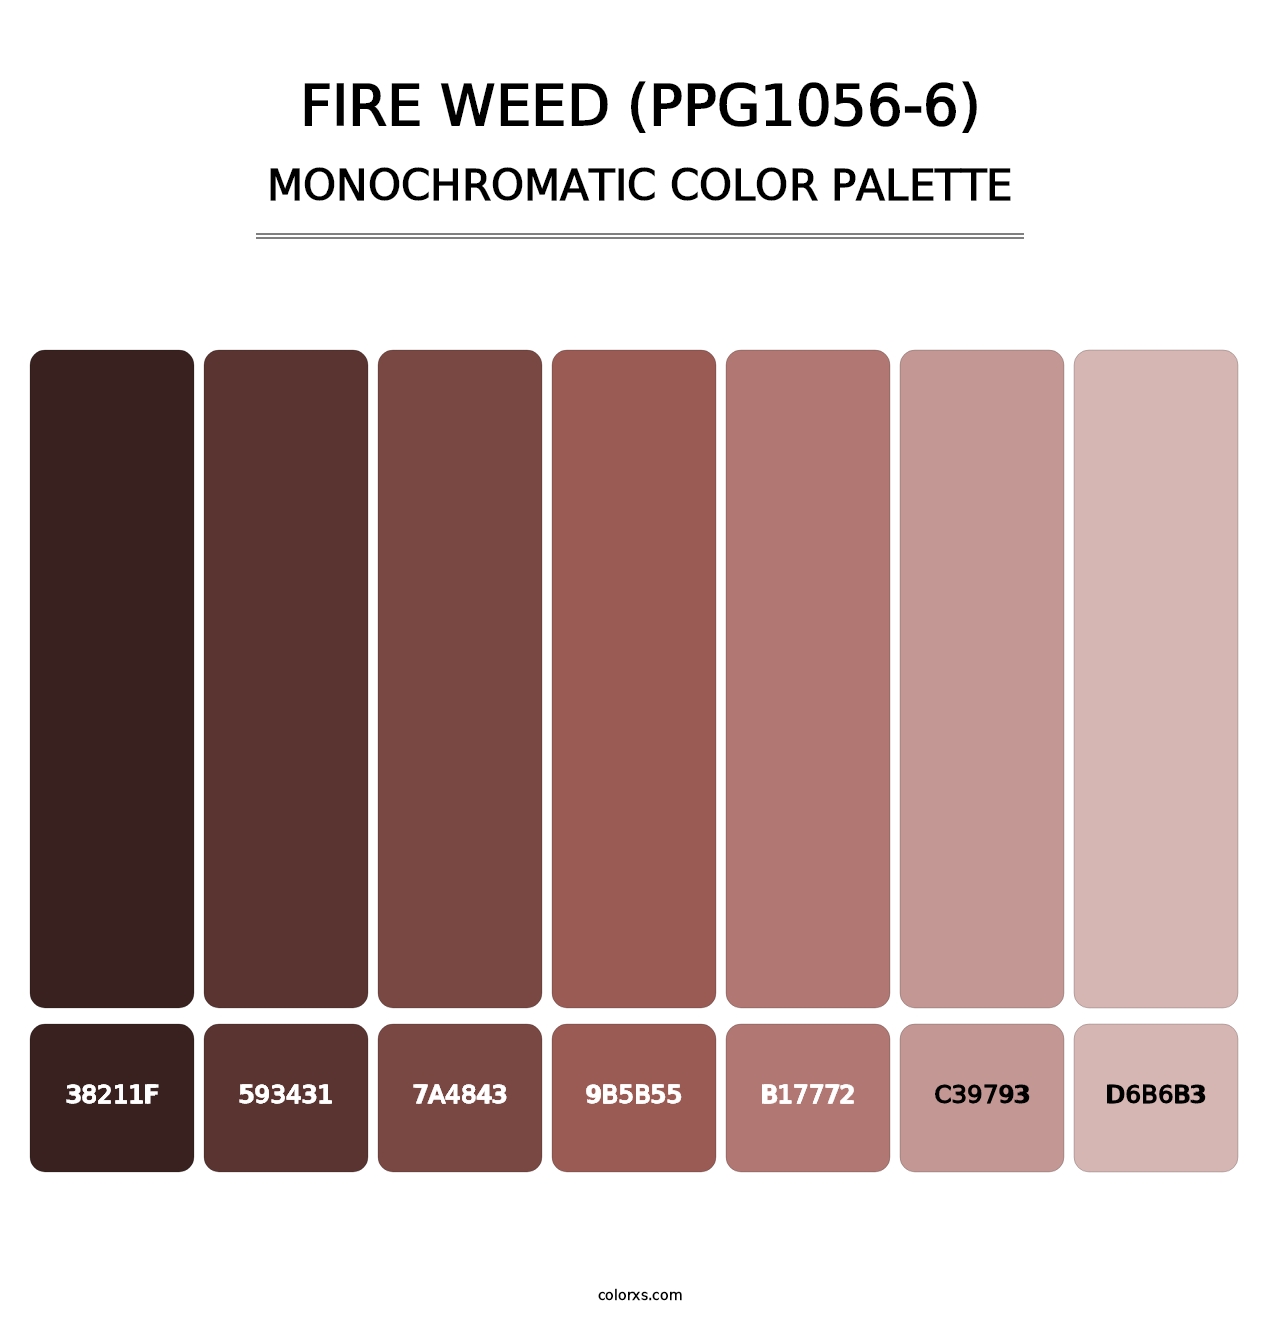 Fire Weed (PPG1056-6) - Monochromatic Color Palette